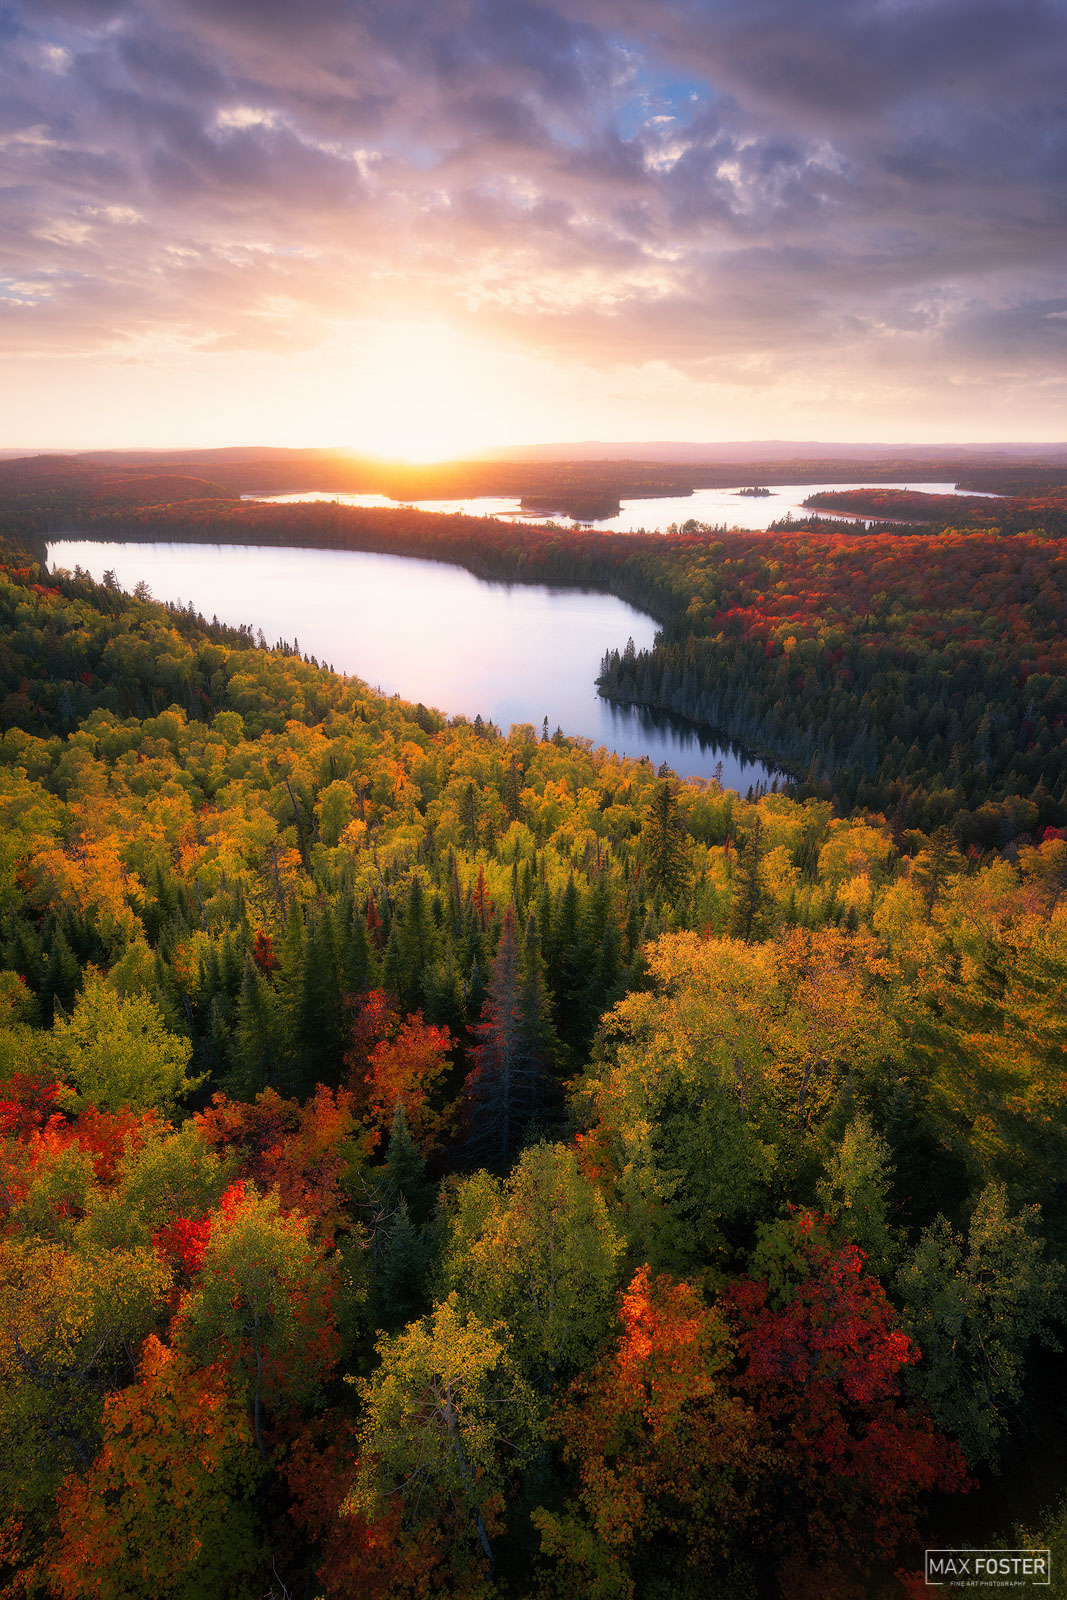 Elevate your space with Tower Hill, Max Foster's limited edition photography of Superior National Forest near Grand Portage from...